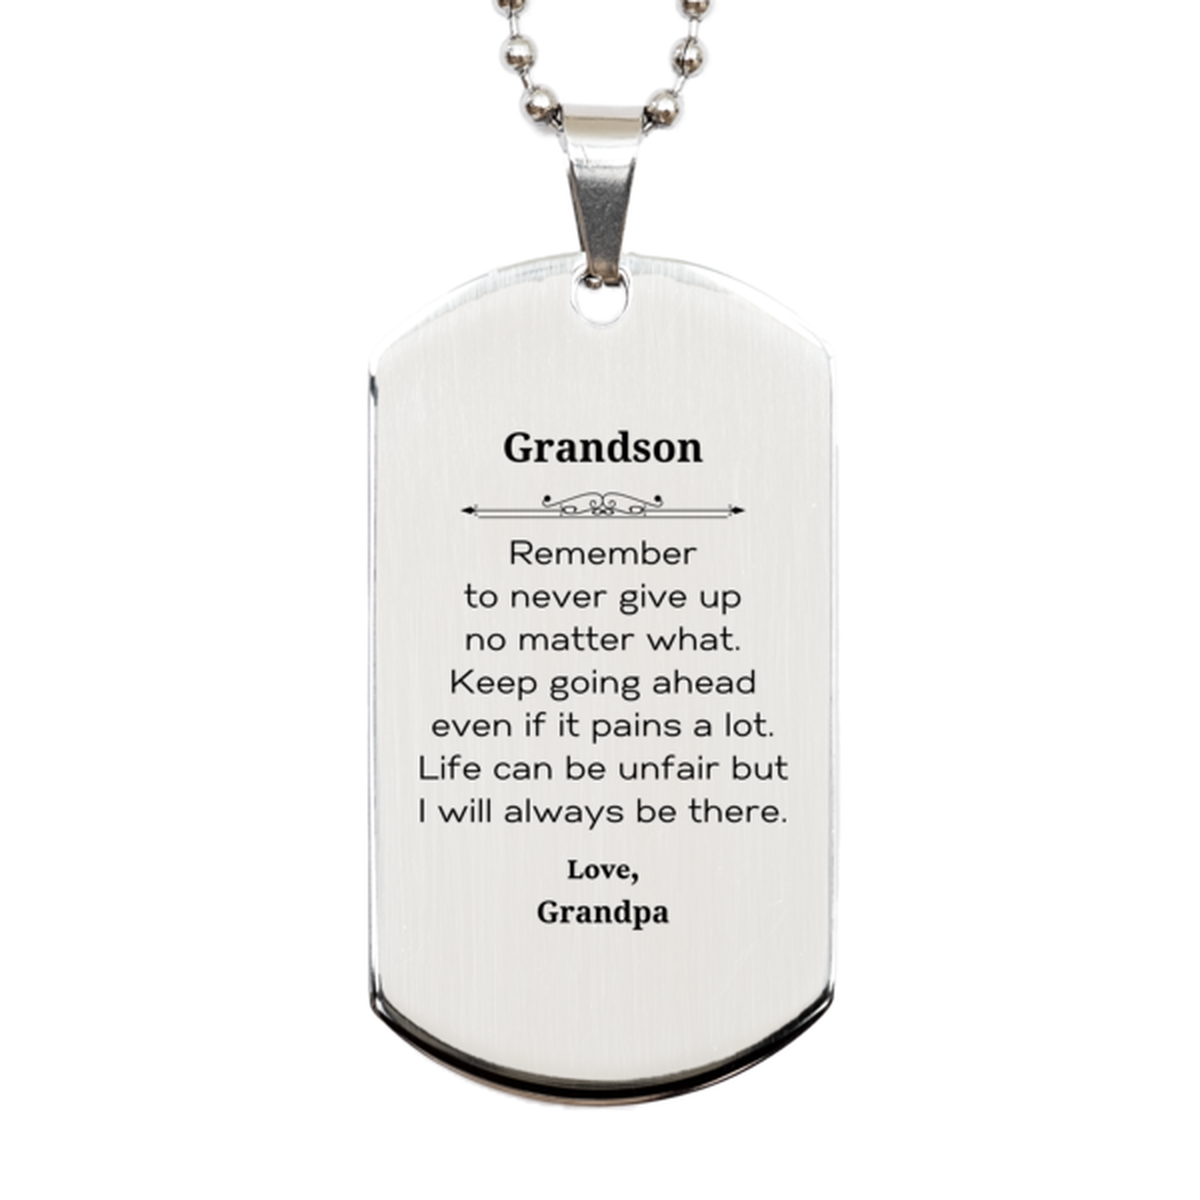 Grandson Motivational Gifts from Grandpa, Remember to never give up no matter what, Inspirational Birthday Silver Dog Tag for Grandson